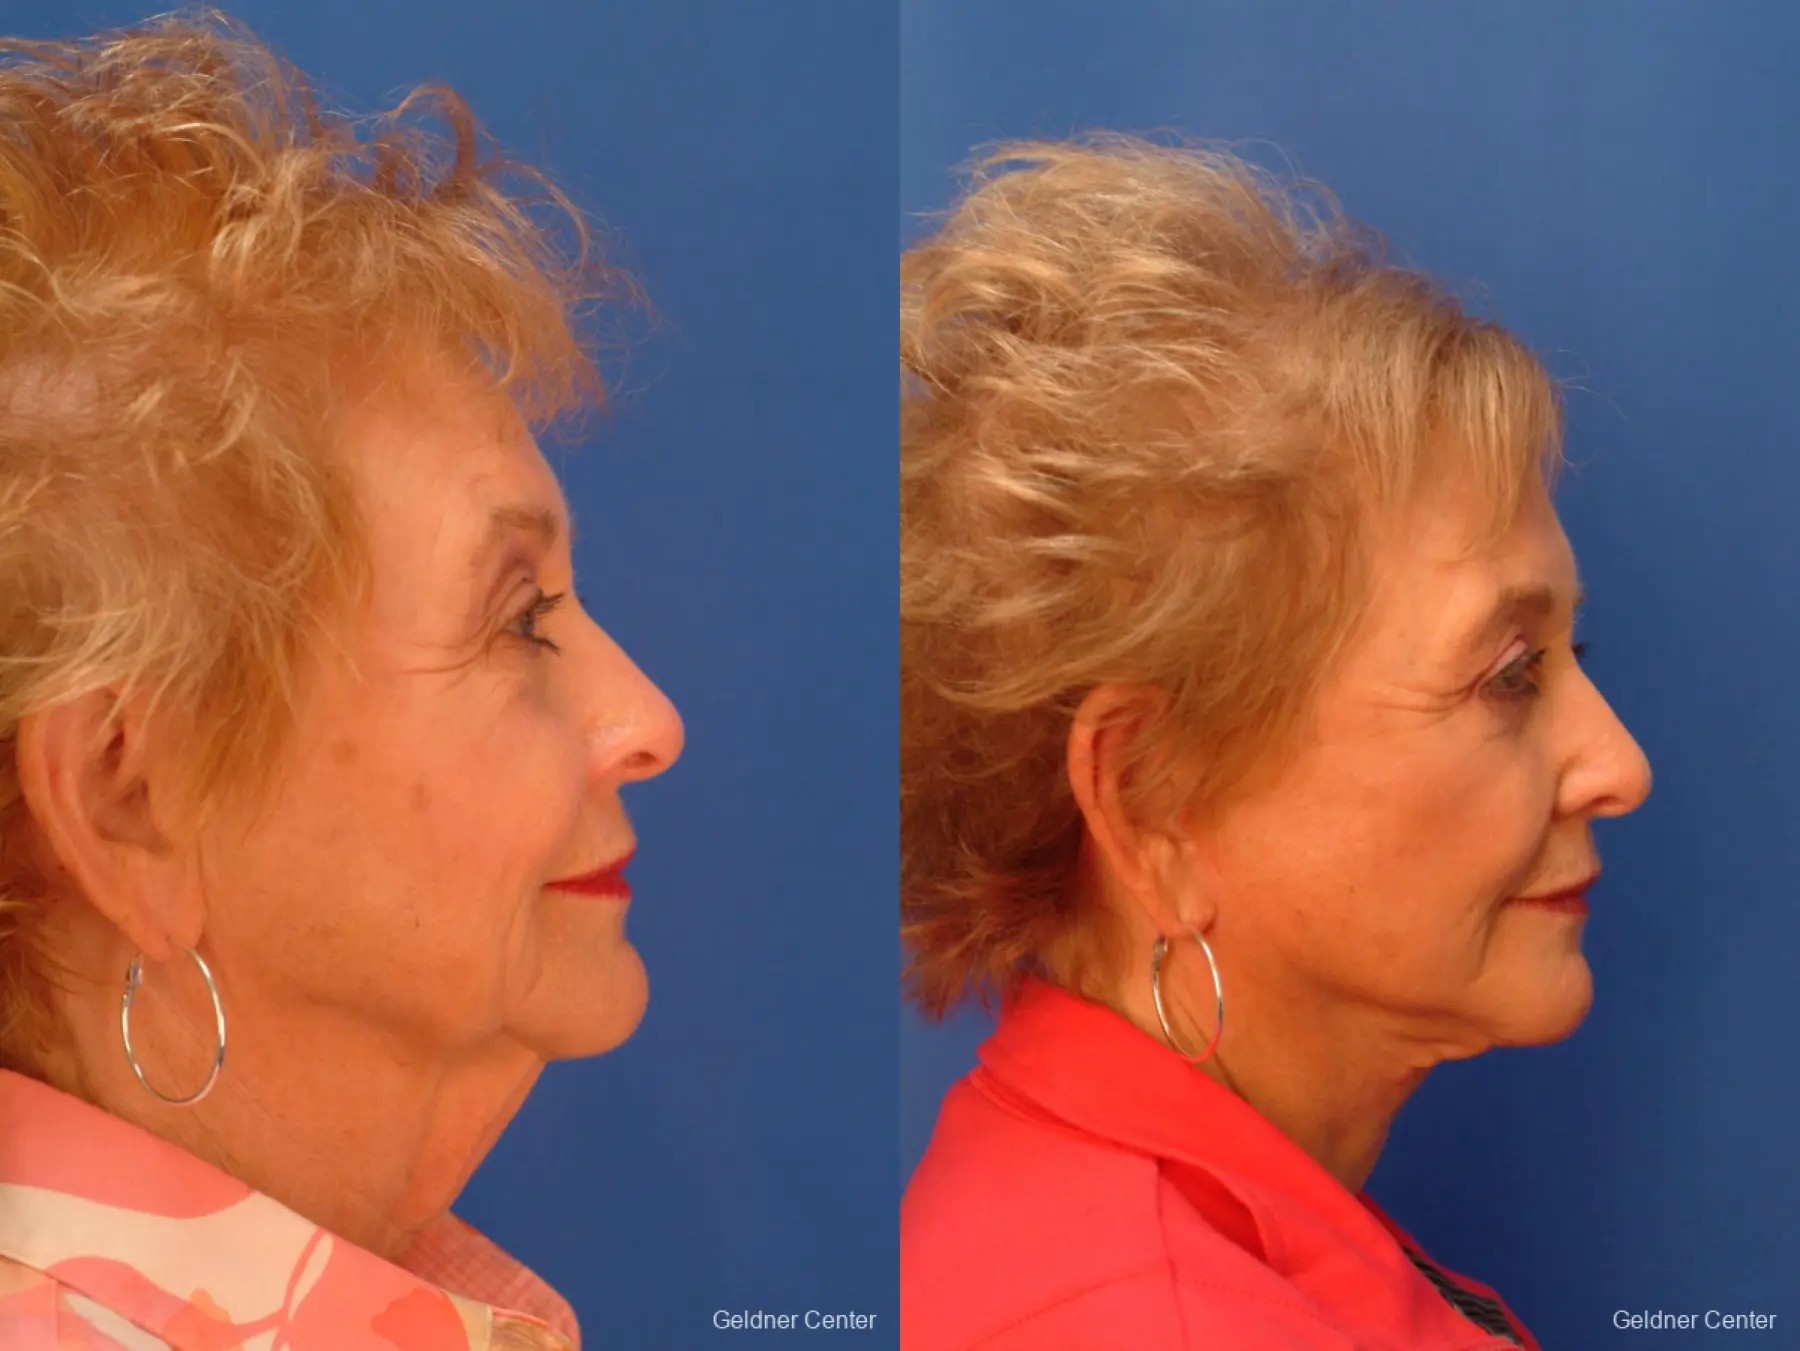 Facelift: Patient 1 - Before and After 2